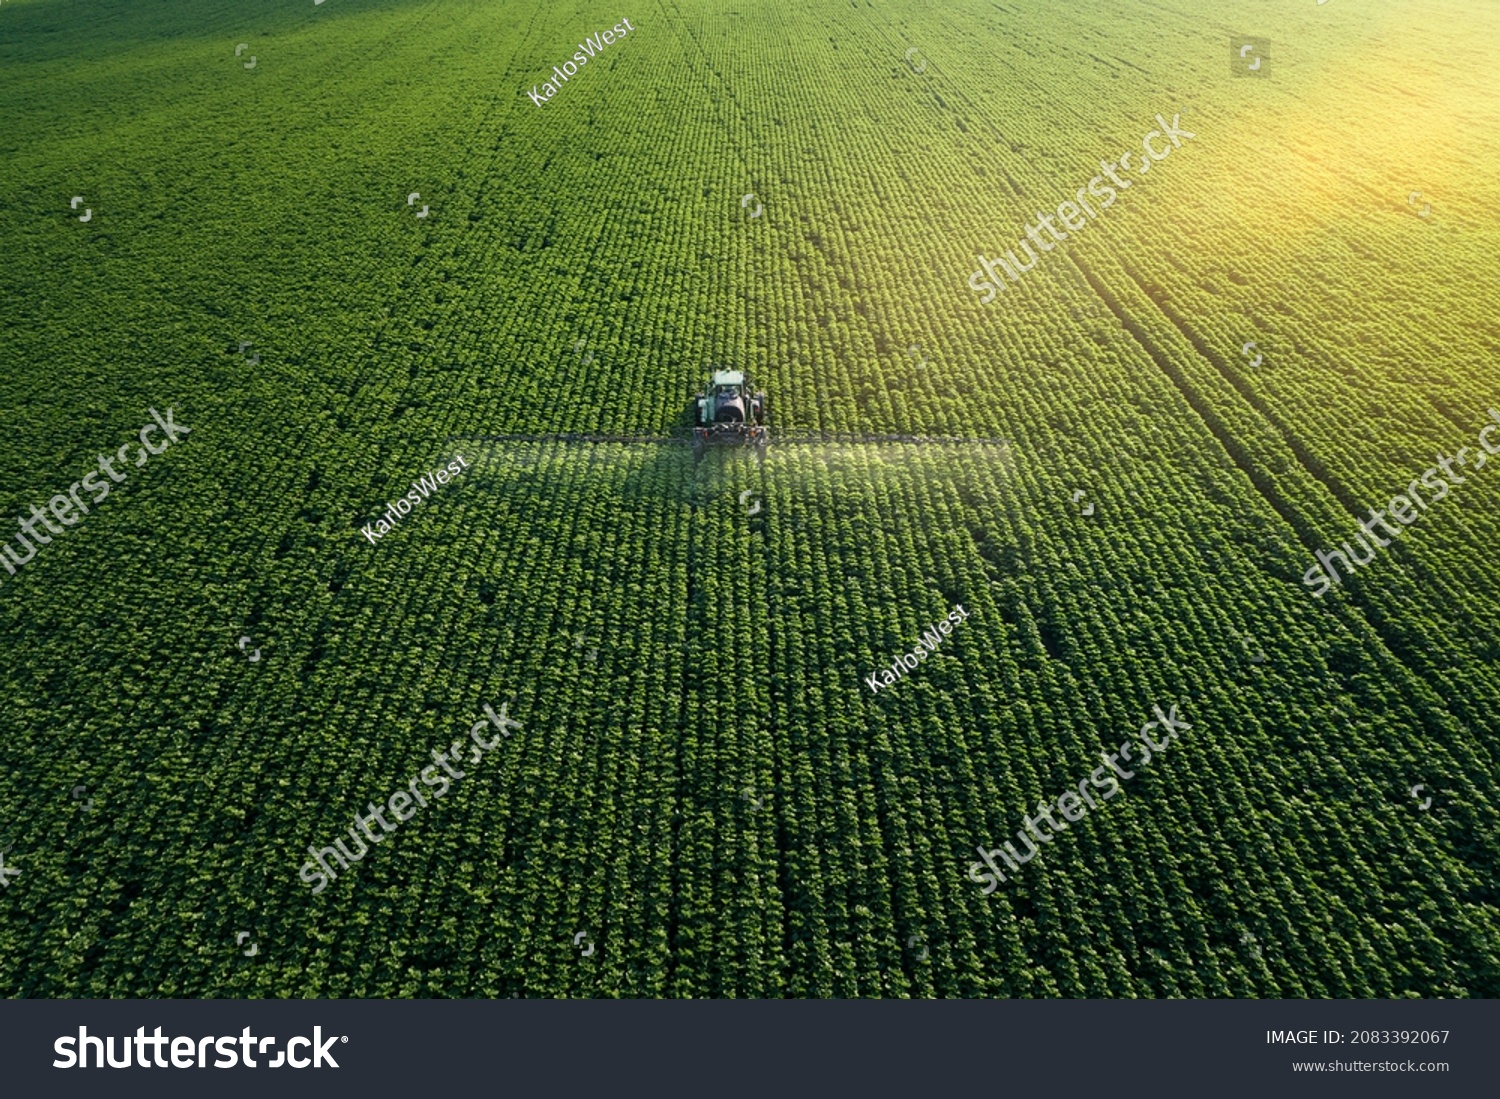 Taking care of the Crop. Aerial view of a Tractor fertilizing a cultivated agricultural field. #2083392067